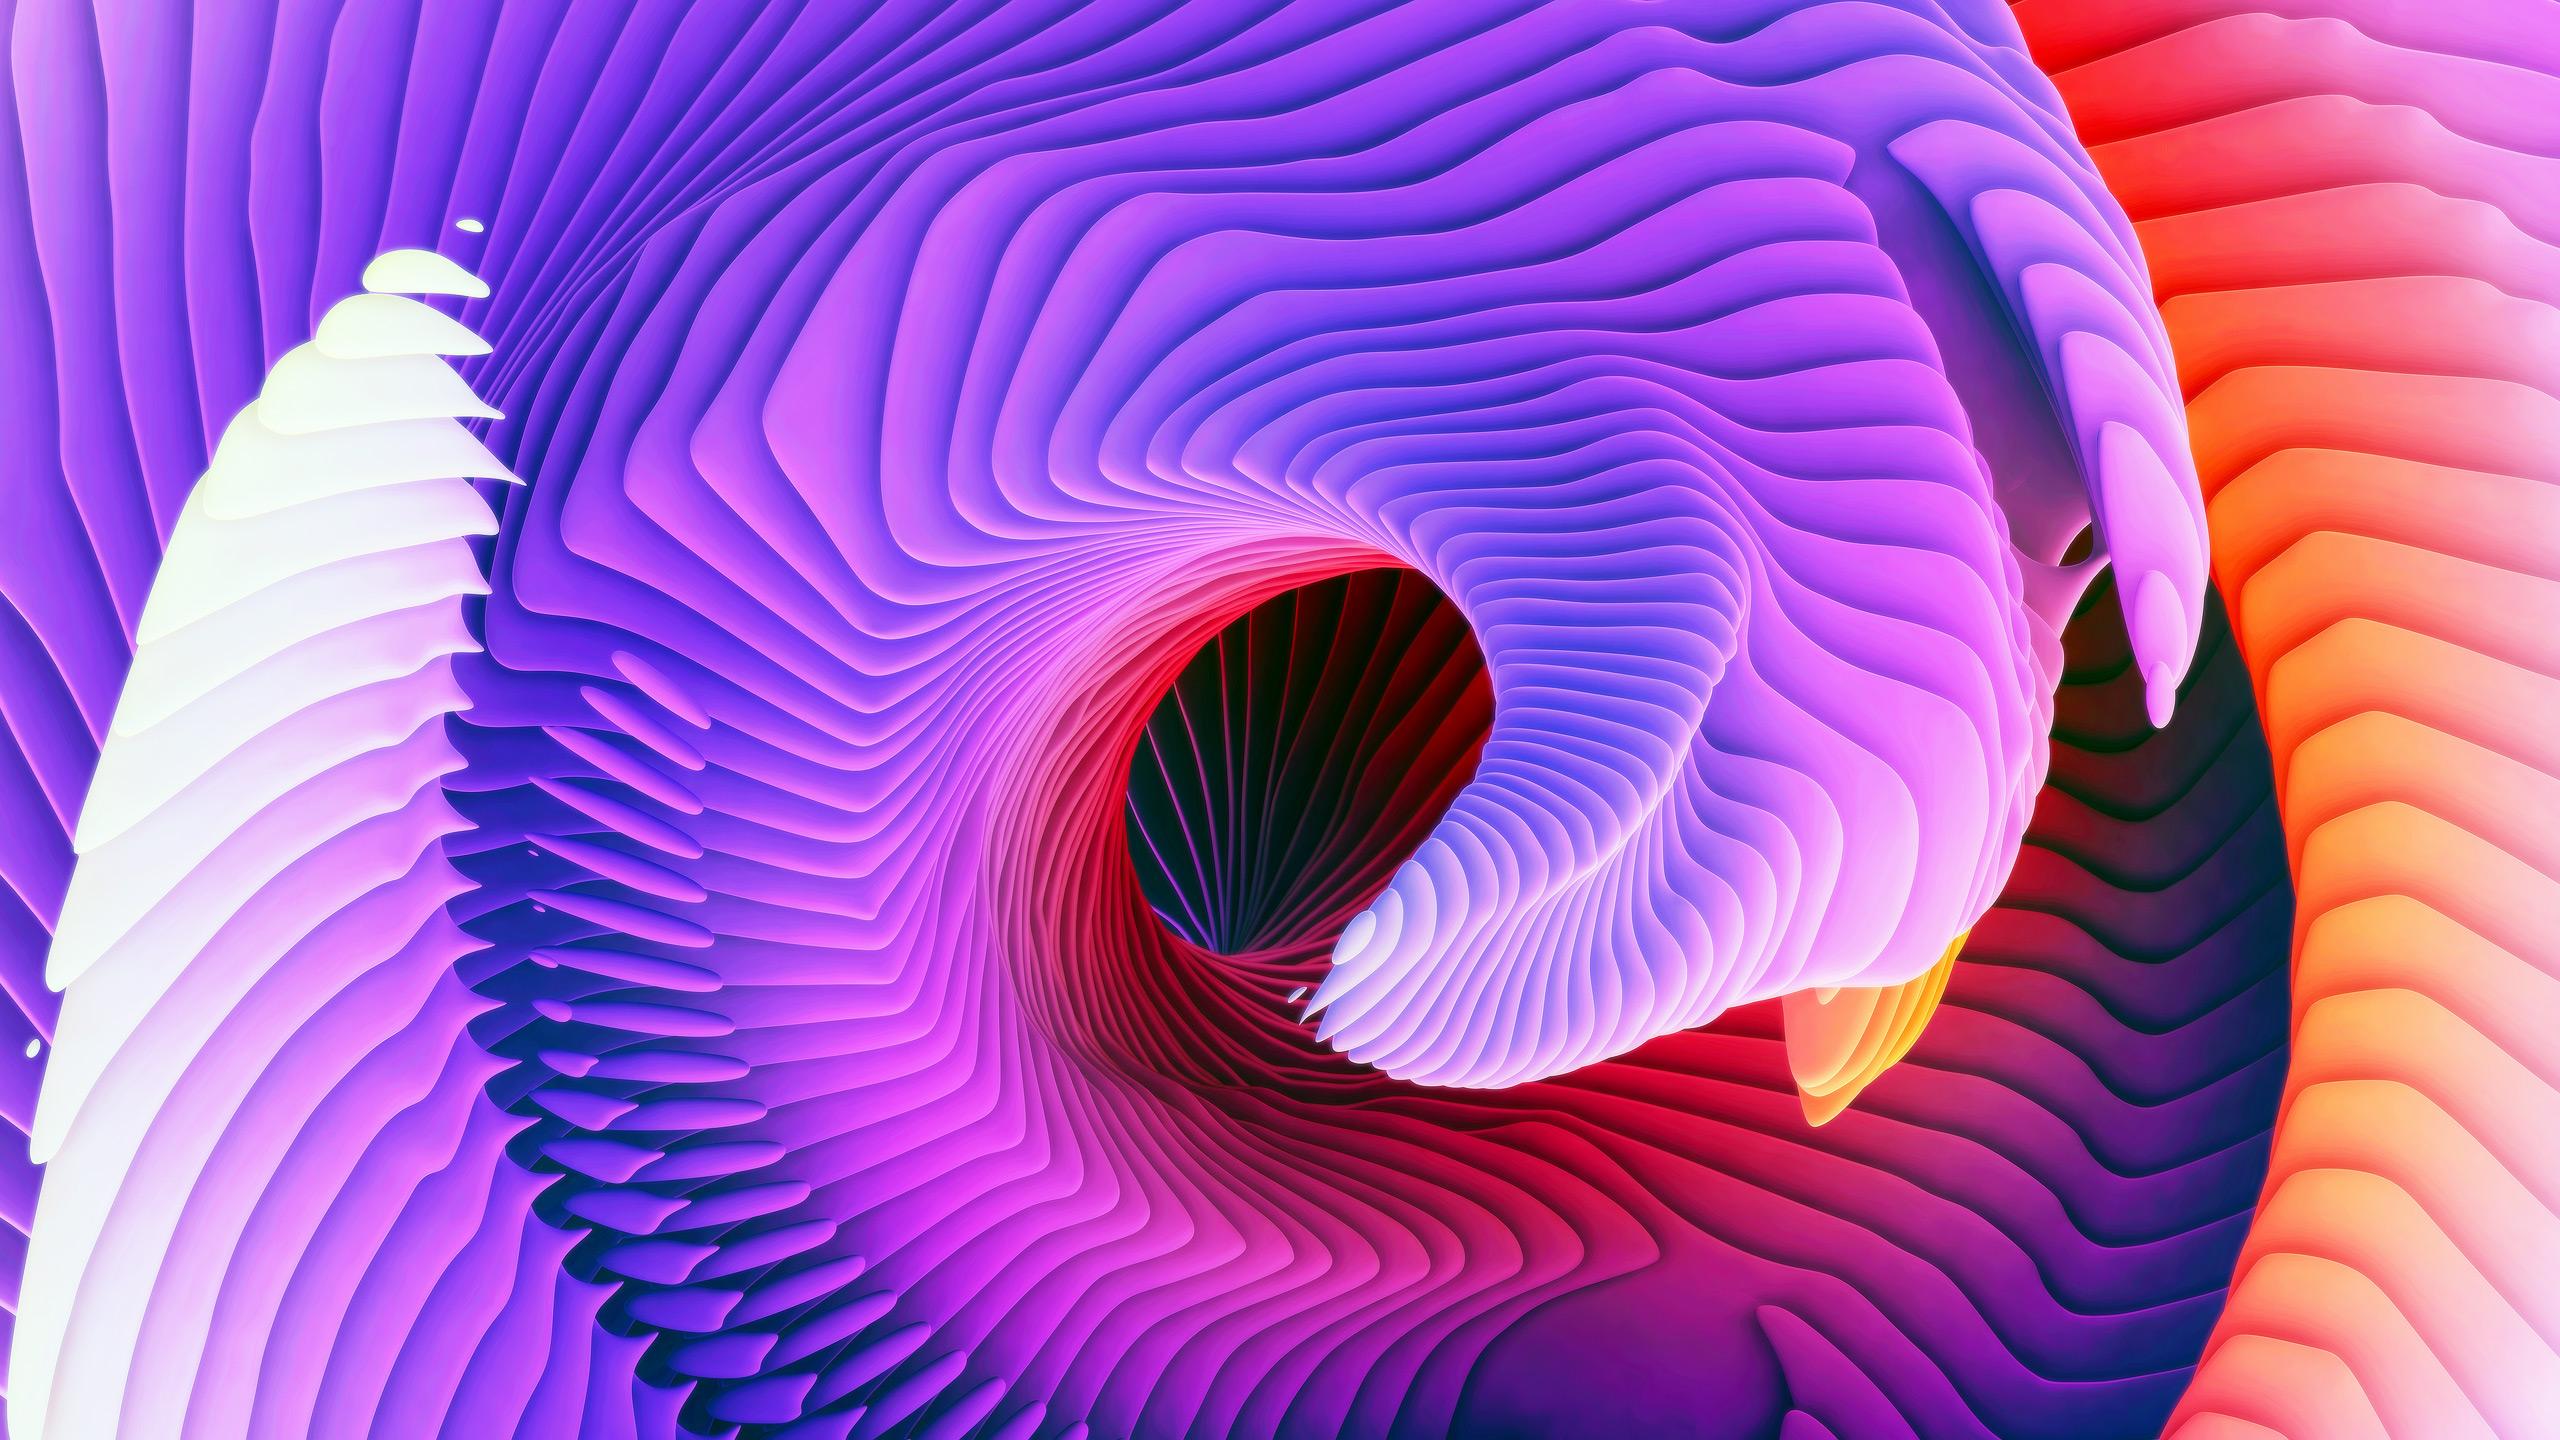 Wallpaper Waves, Spiral, 3D, Colorful, HD, Abstract